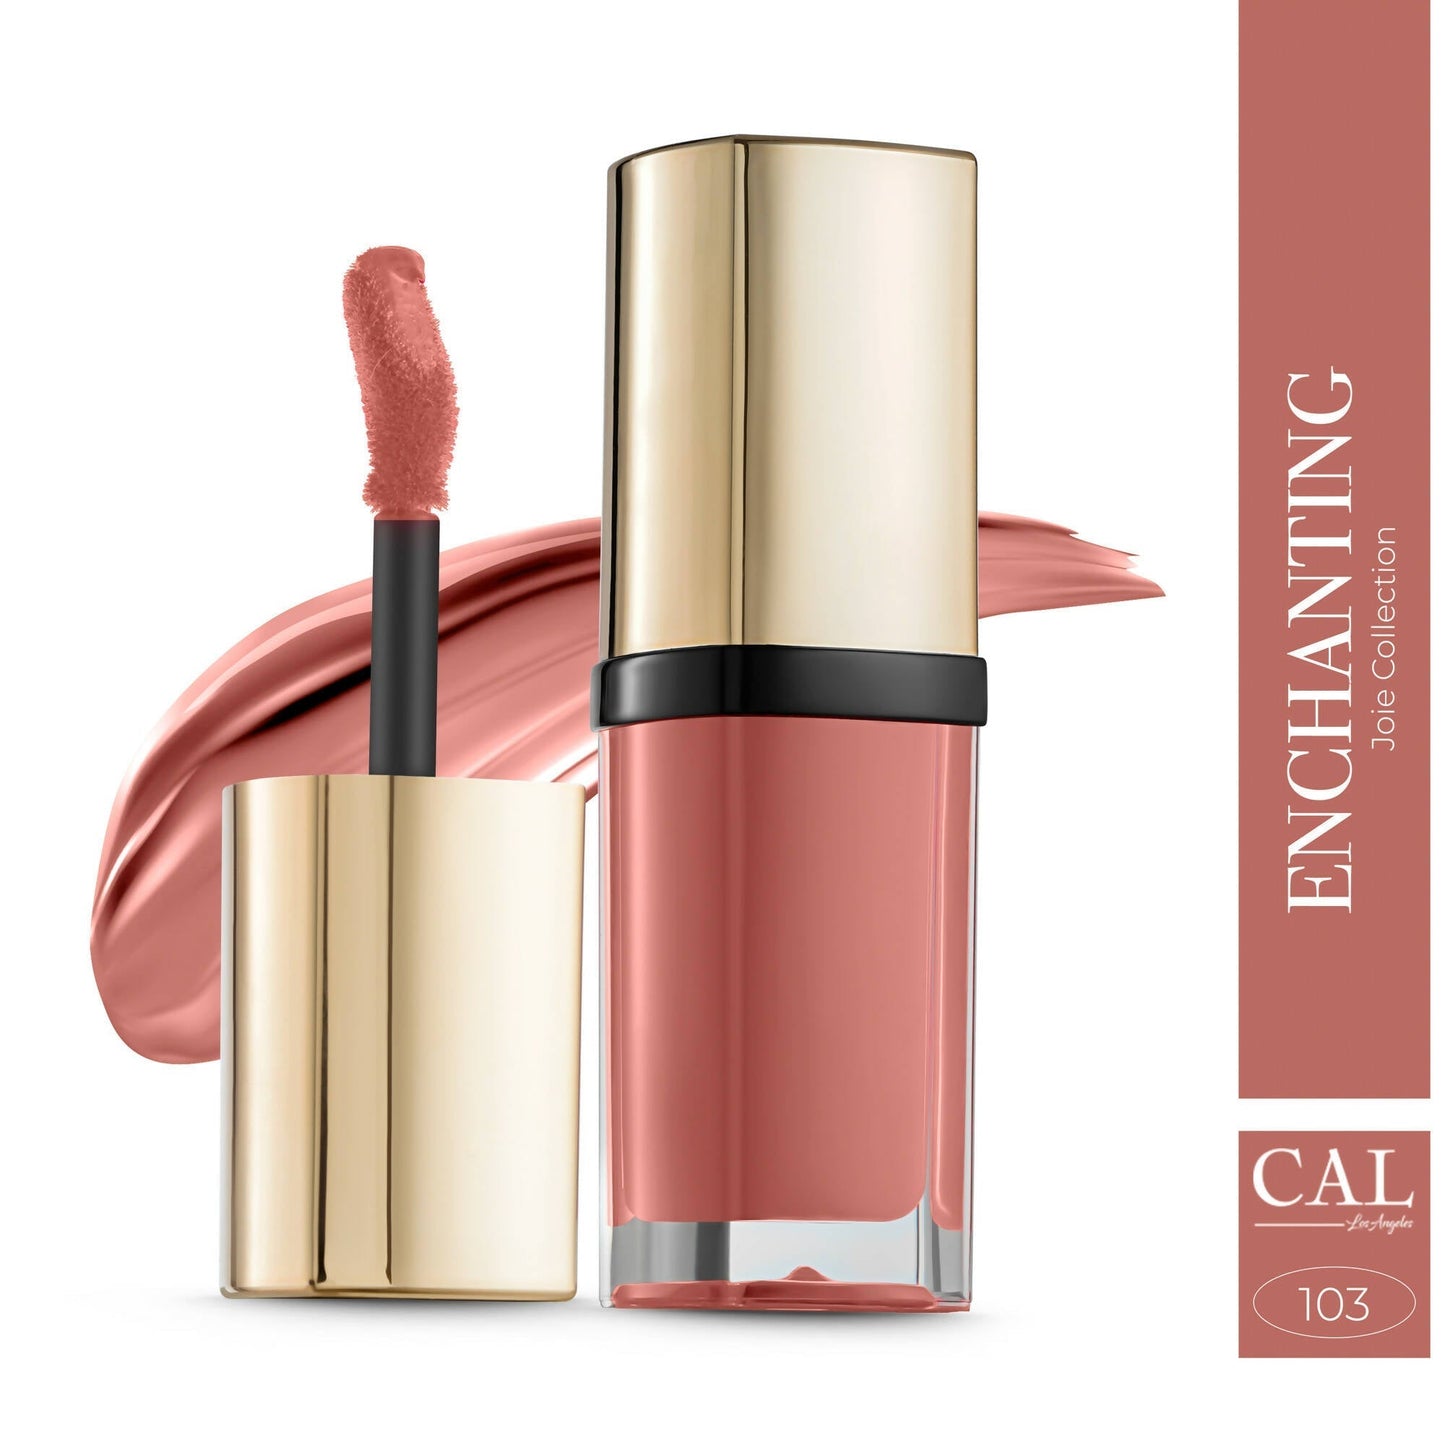 CAL Los Angeles Joie Collection Liquid Matte Rose Pink Lipstick - Enchanting 103